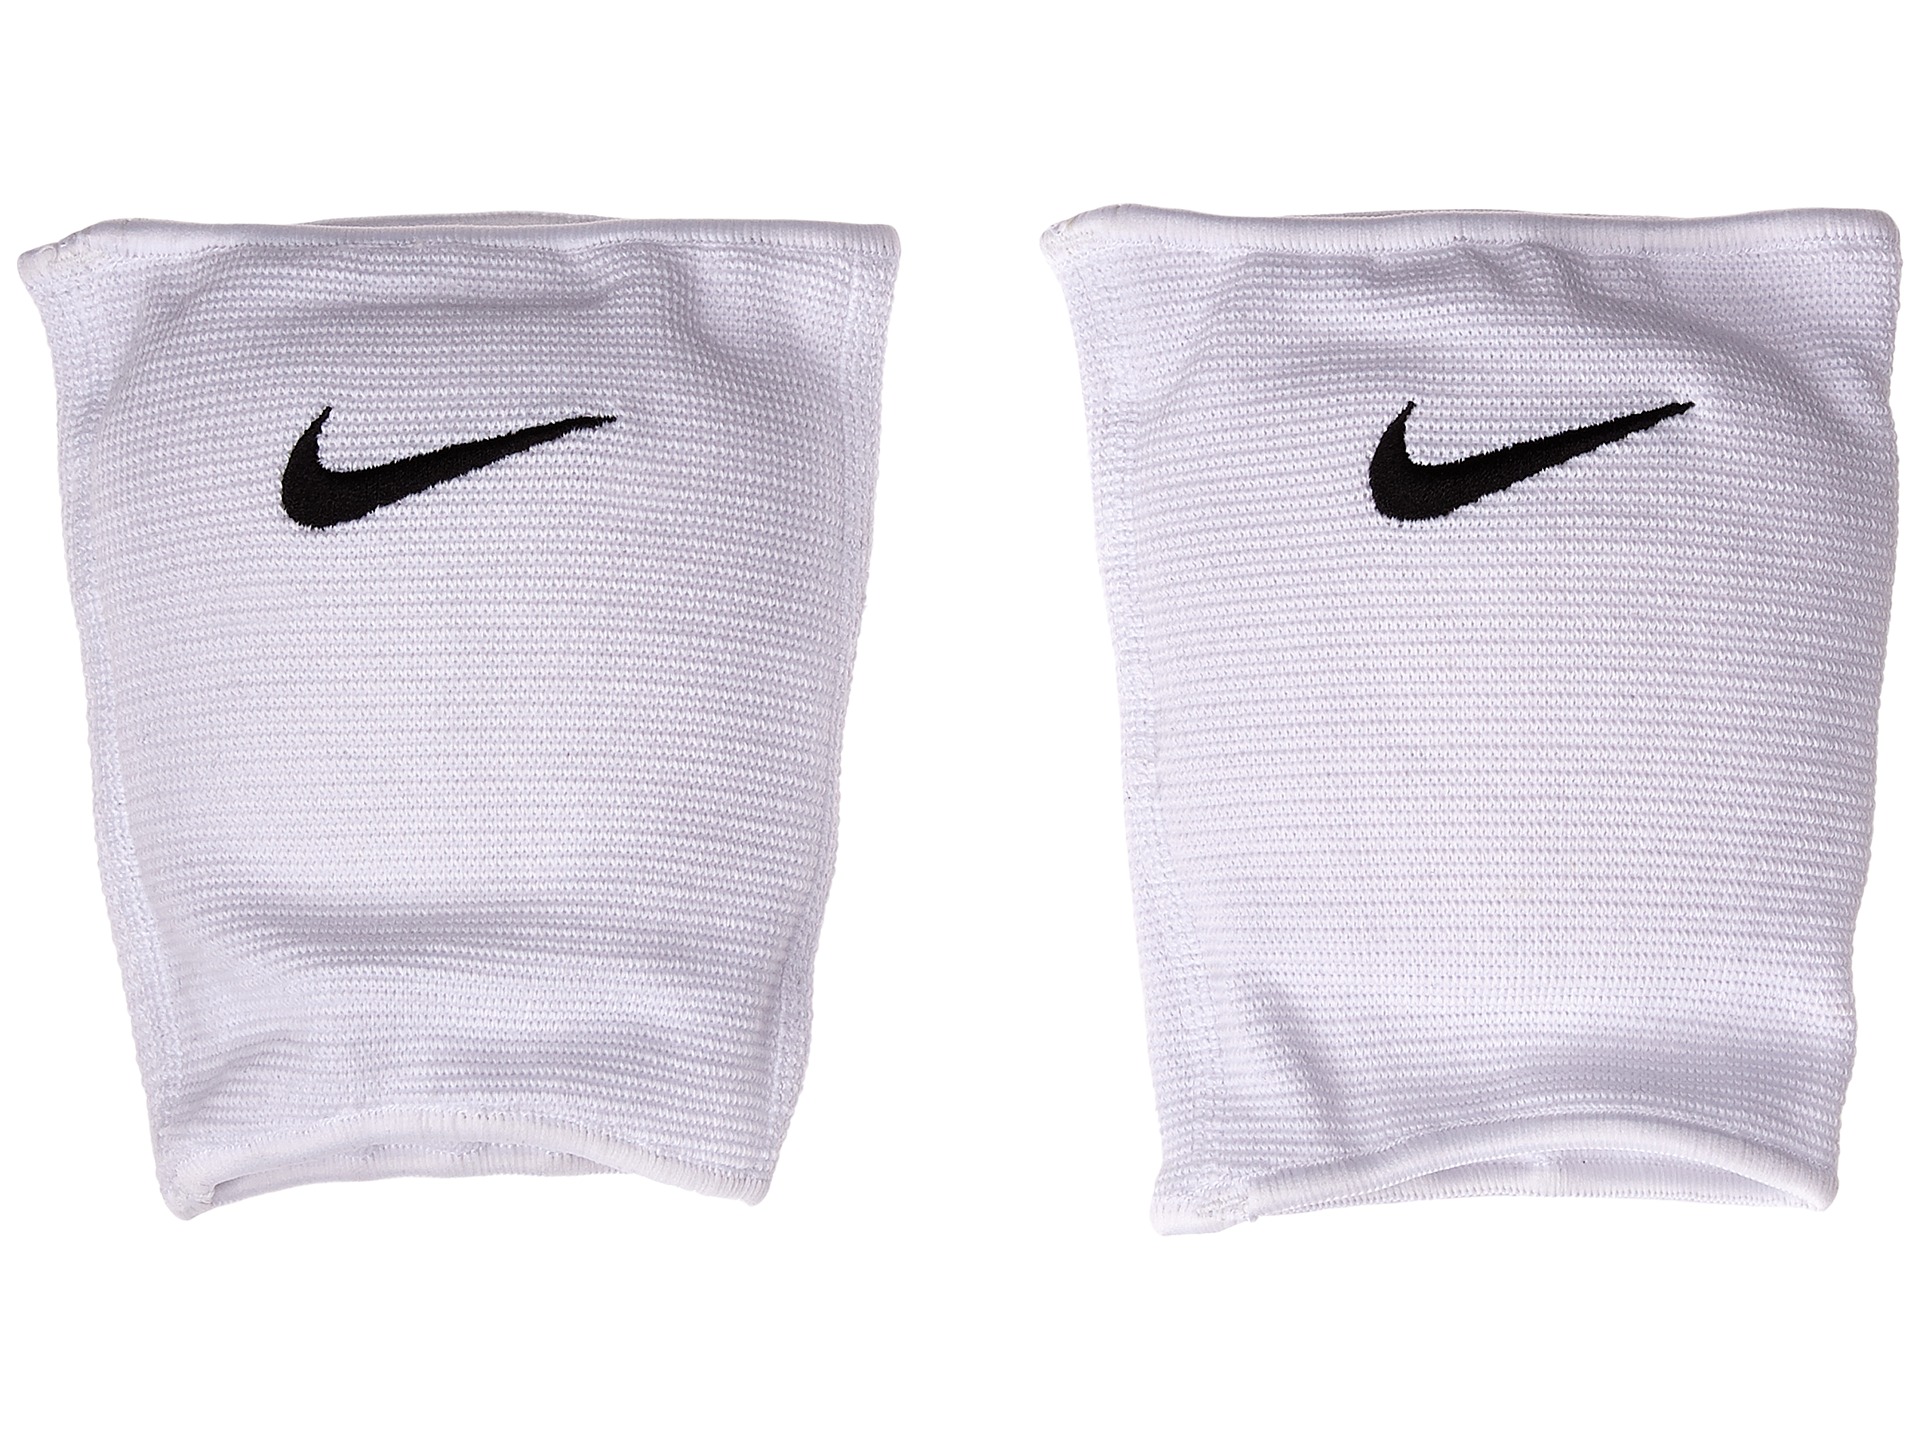 Nike Volleyball Knee Pad Size Chart